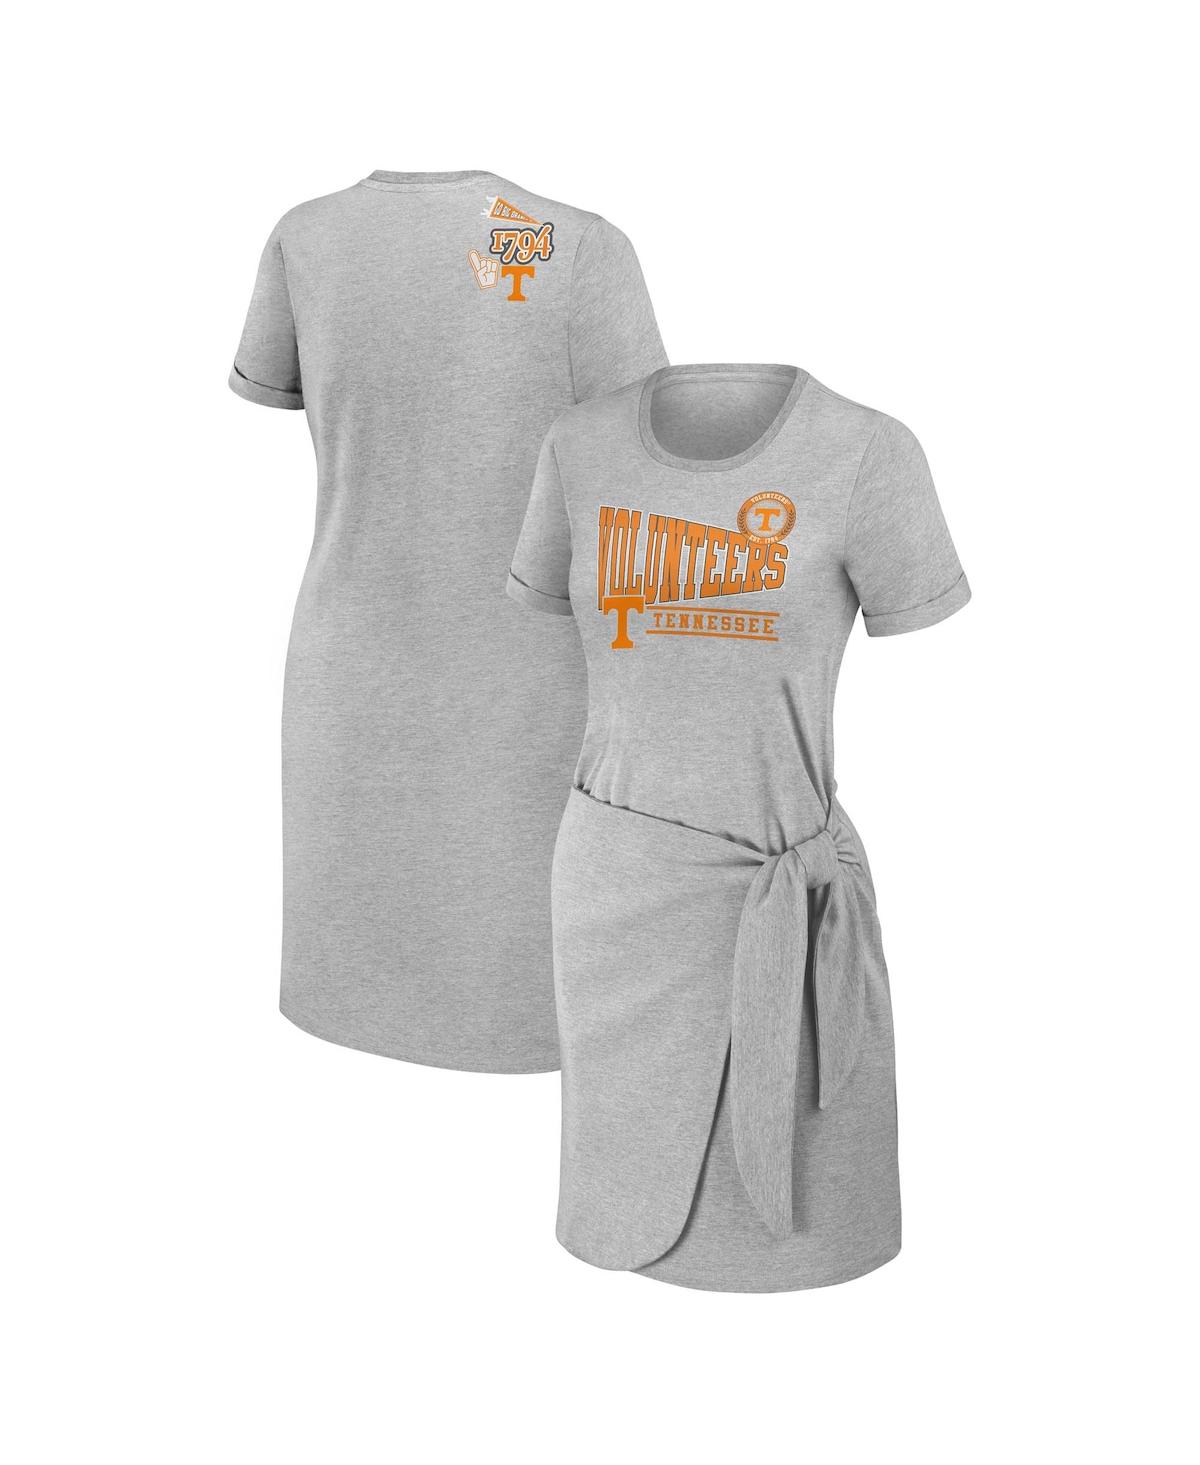 Wear By Erin Andrews Women's  Heather Gray Tennessee Volunteers Knotted T-shirt Dress